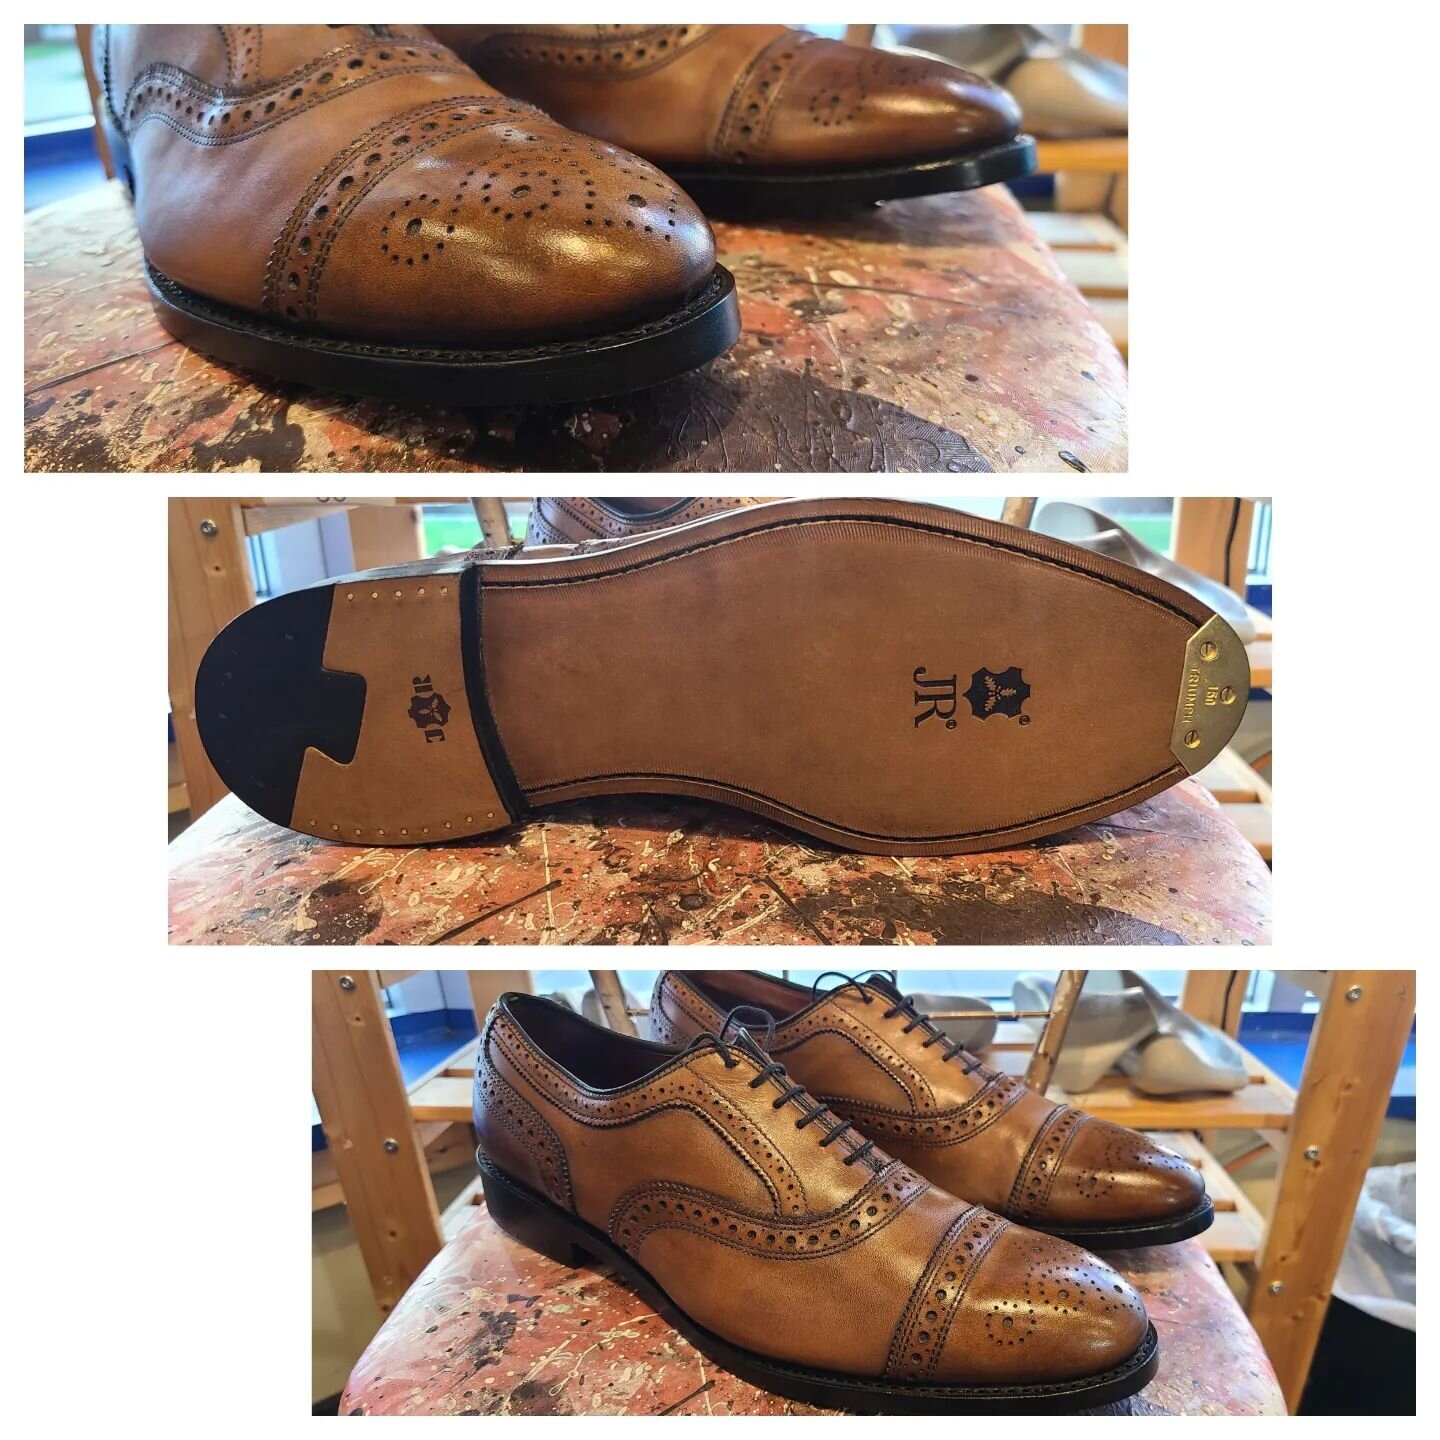 Complete @jr_by_kilger  rebuild on a pair of beautifully well loved @allenedmonds Strands. These were rebuilt with new JR leather soles, but also new combination (combination of leather and rubber) heels, Triumph Toe Plates, new shanks, internal cork